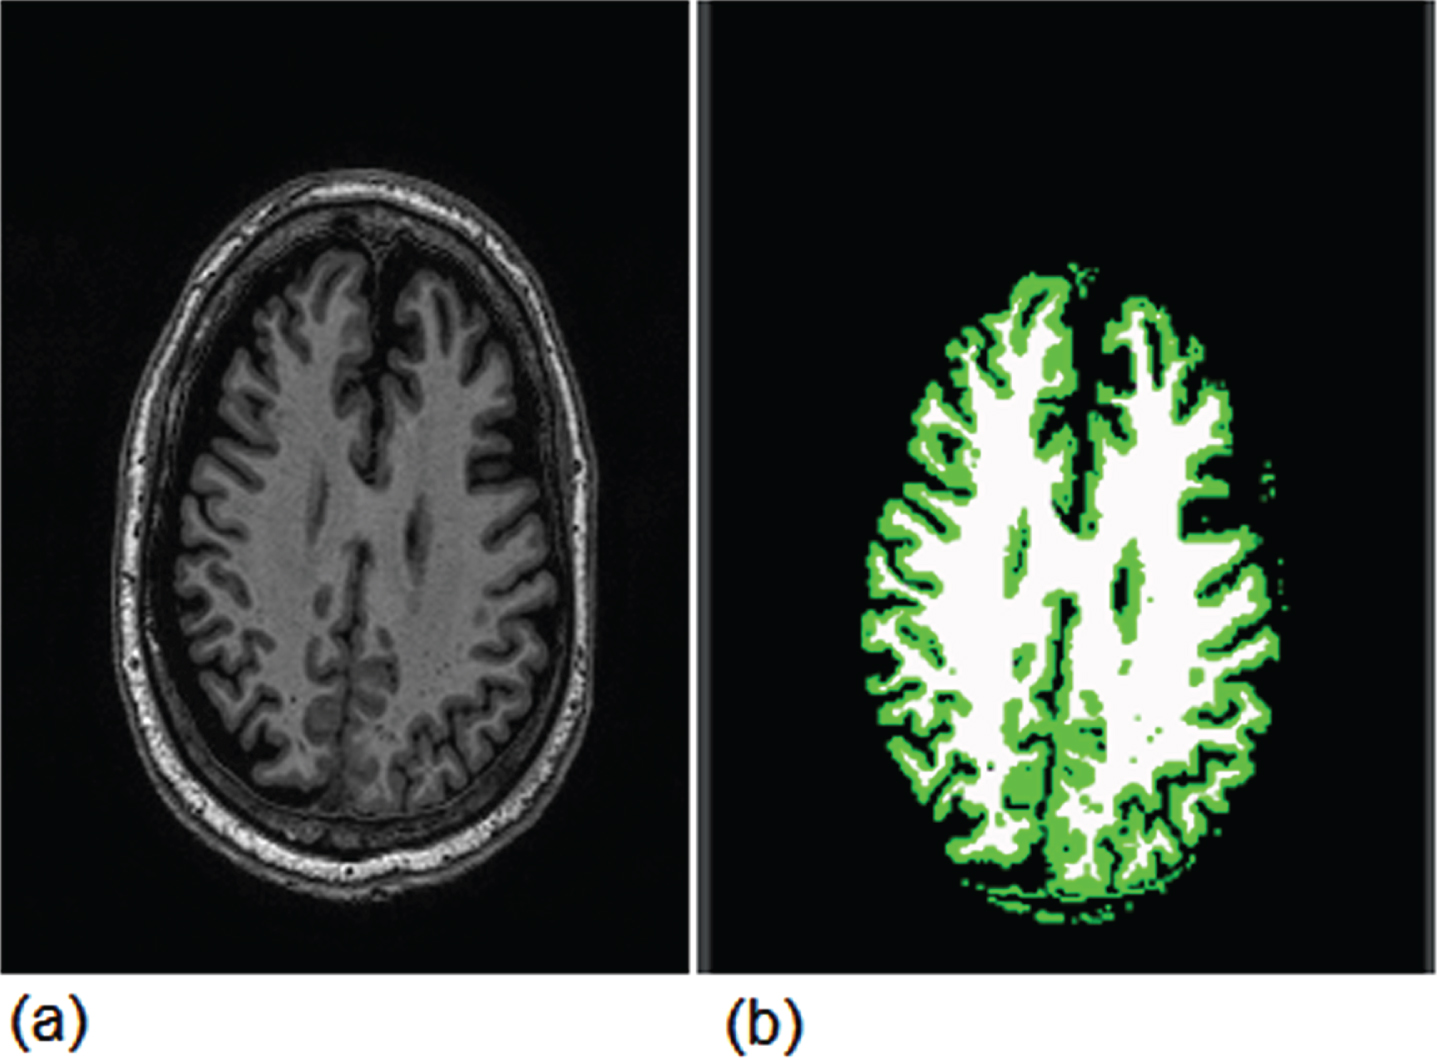 Extraction of gray and white matter areas using image segmentation.